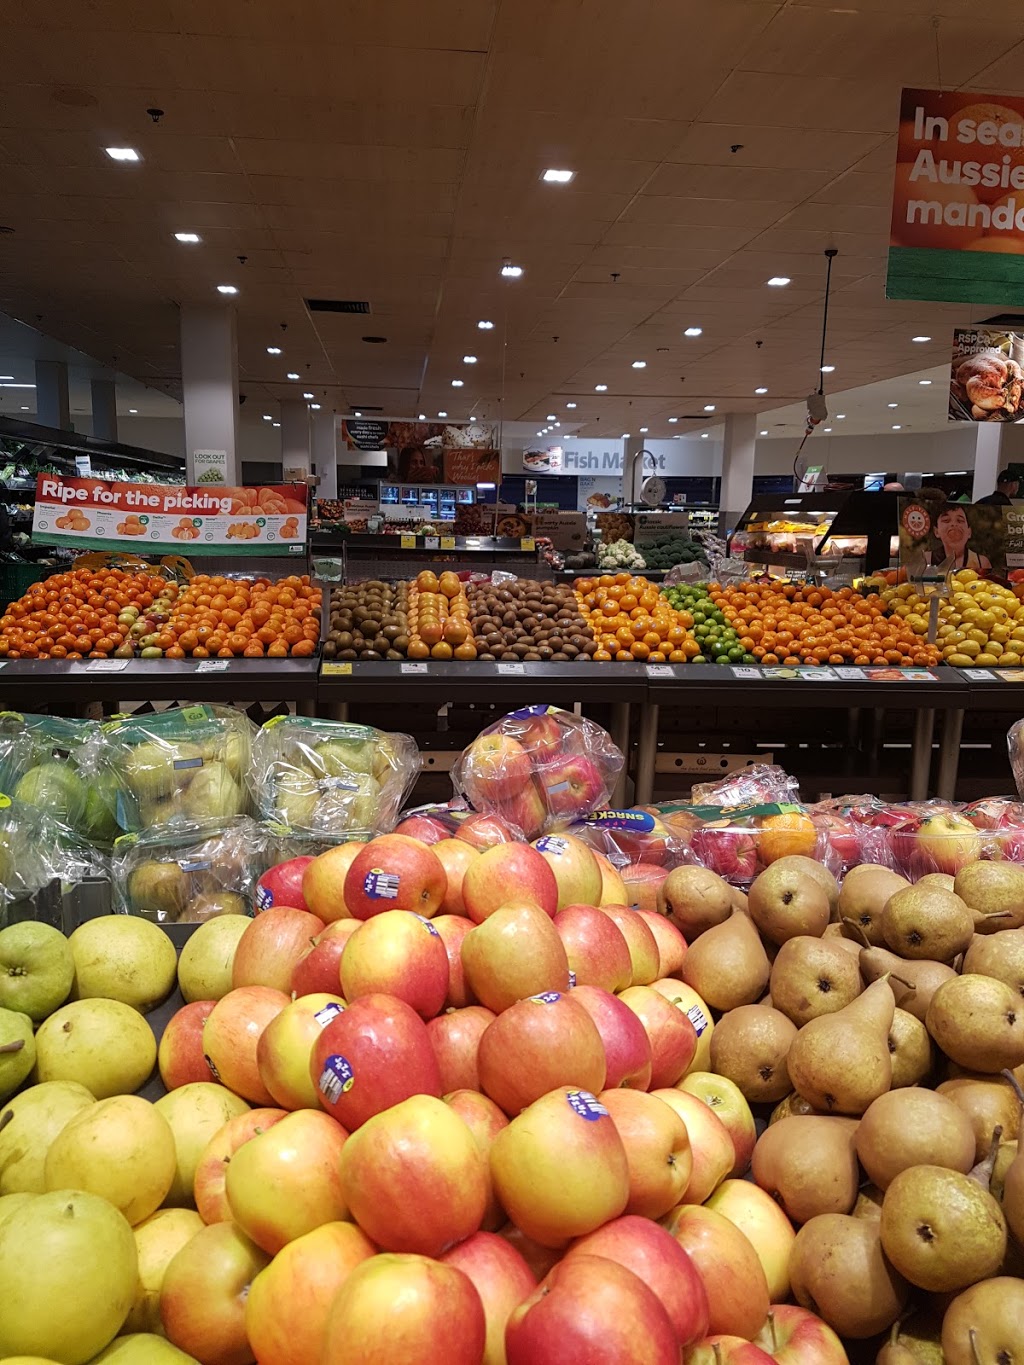 Woolworths | supermarket | The Ponds Blvd &, Riverbank Dr, The Ponds NSW 2769, Australia | 0296776462 OR +61 2 9677 6462